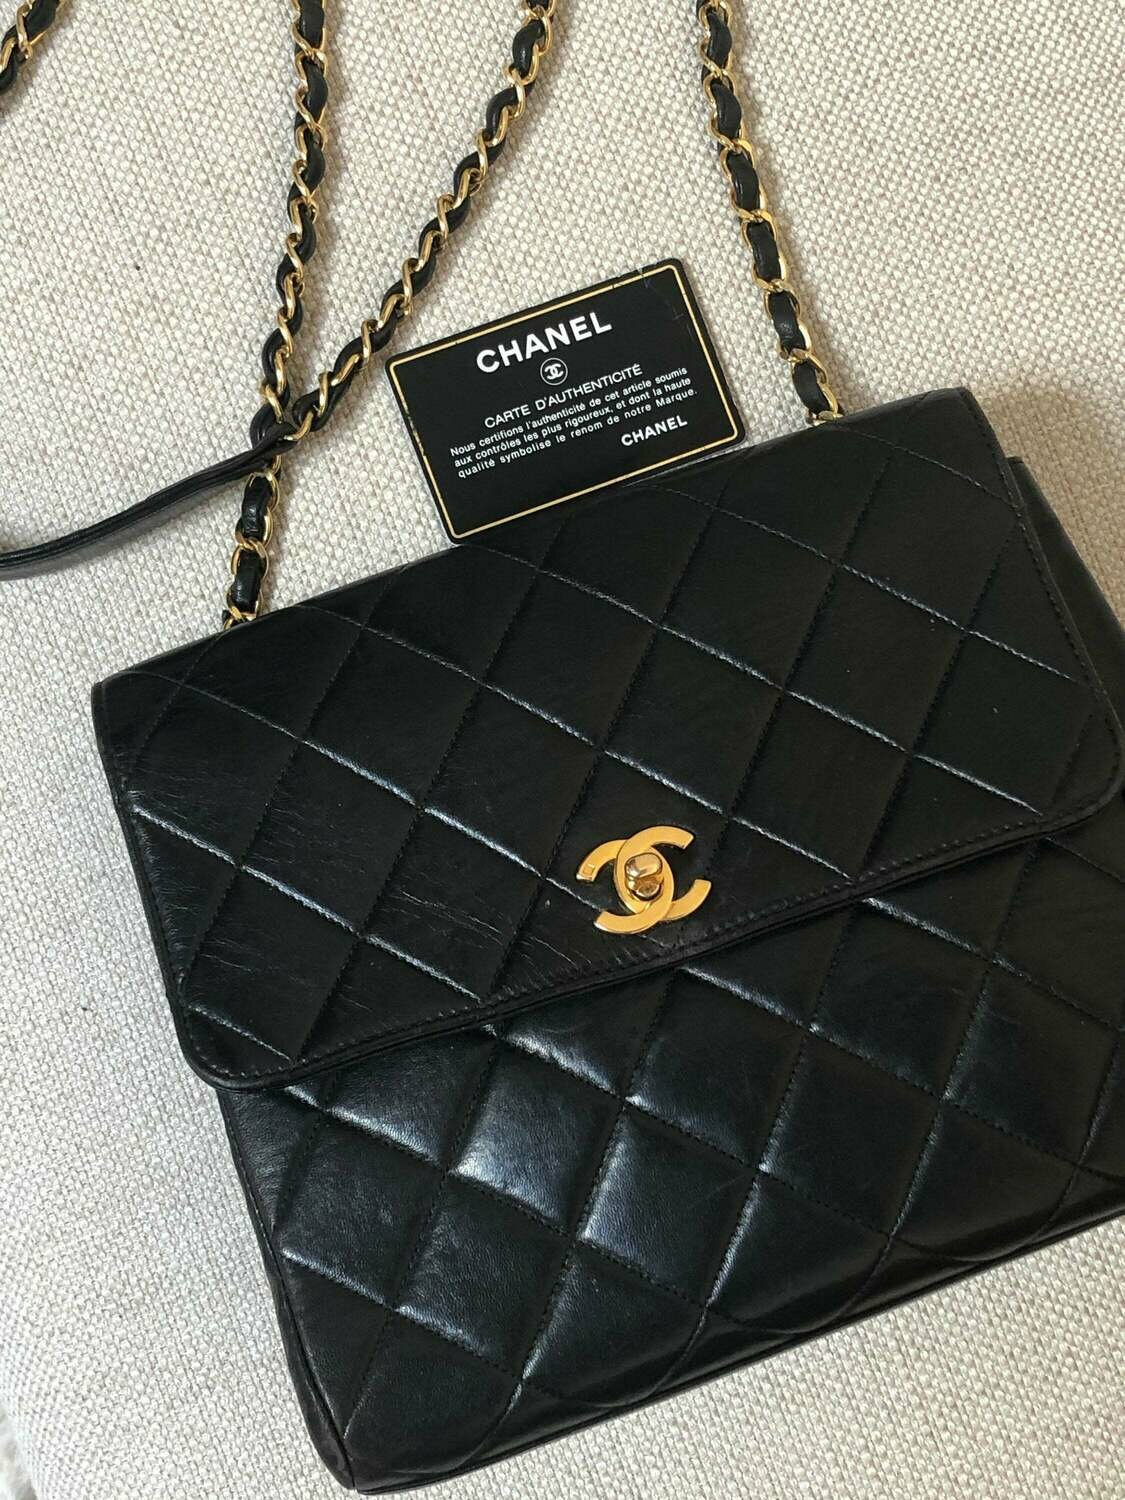 chanel small black leather purse vintage